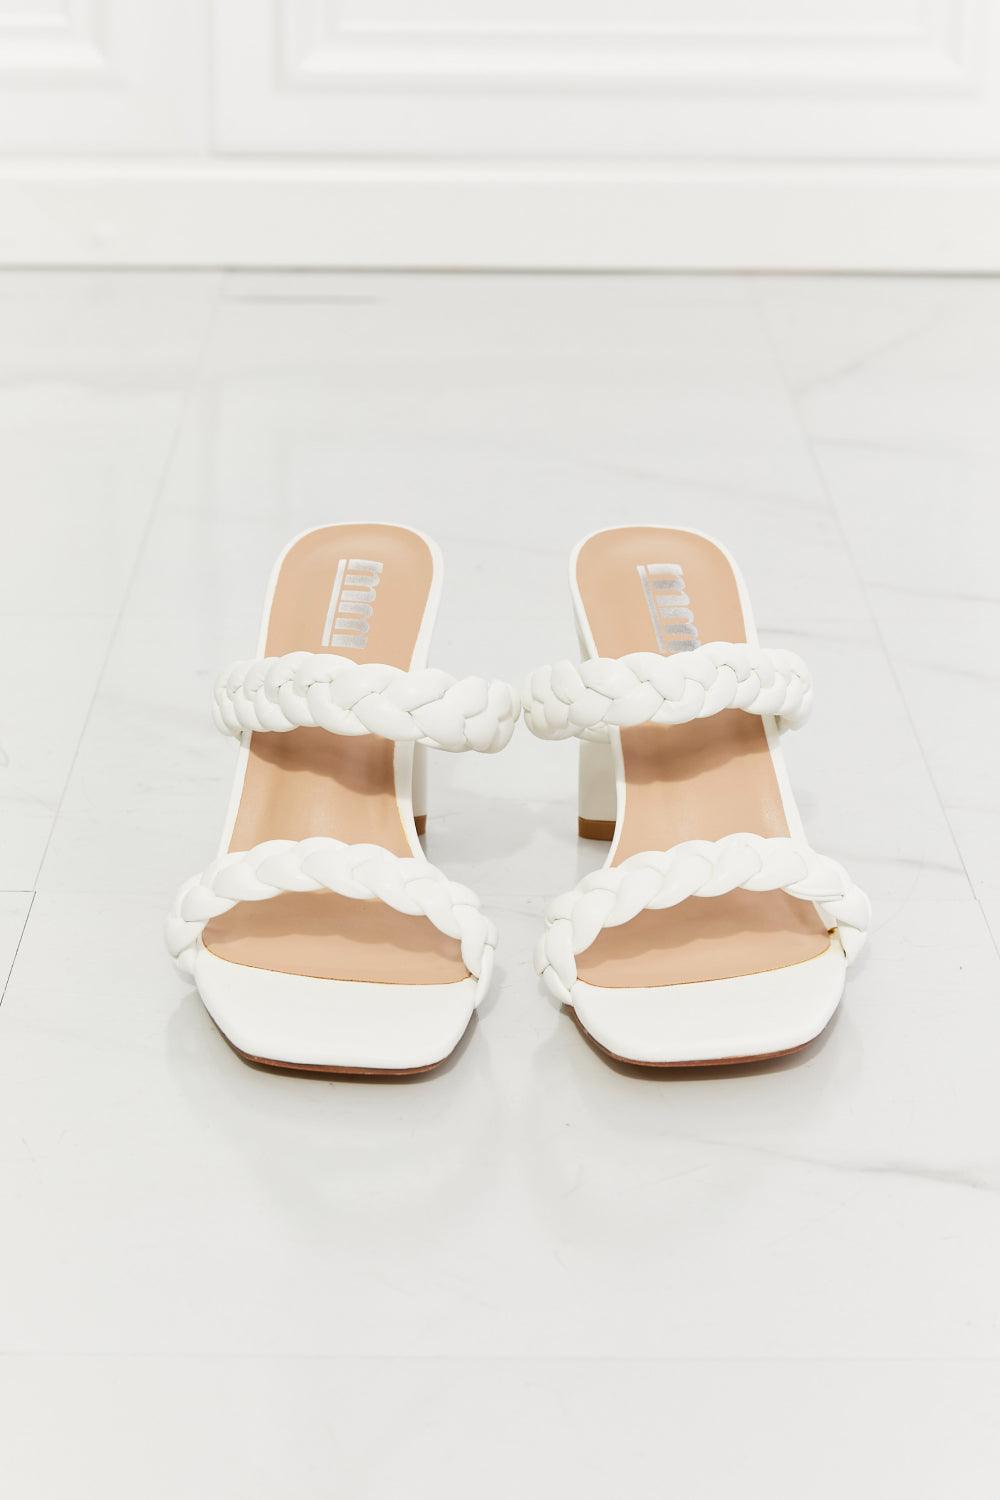 MMShoes In Love Double Braided Block Heel Sandal in White - Glamorous Boutique USA L.L.C.